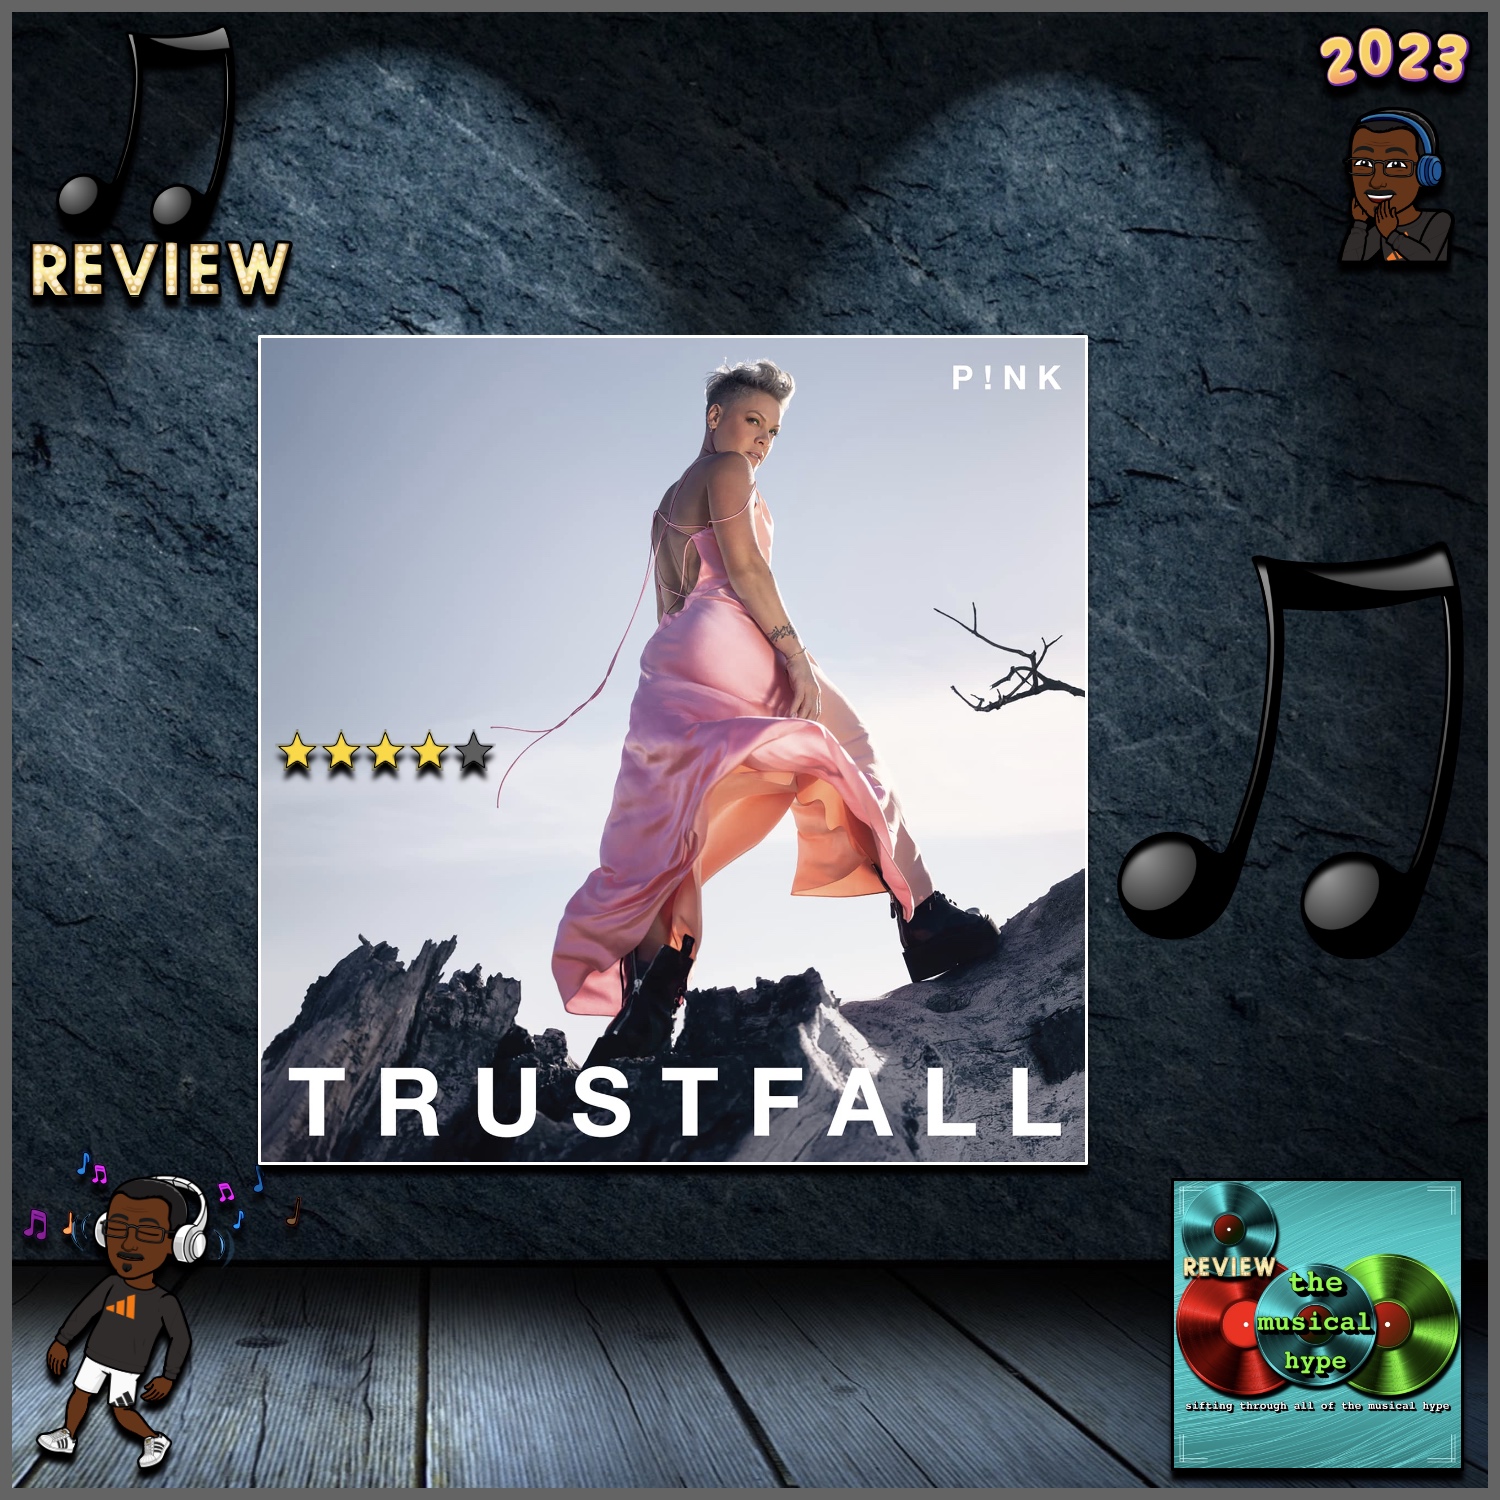 P!nk, TRUSTFALL Track Review 🎵